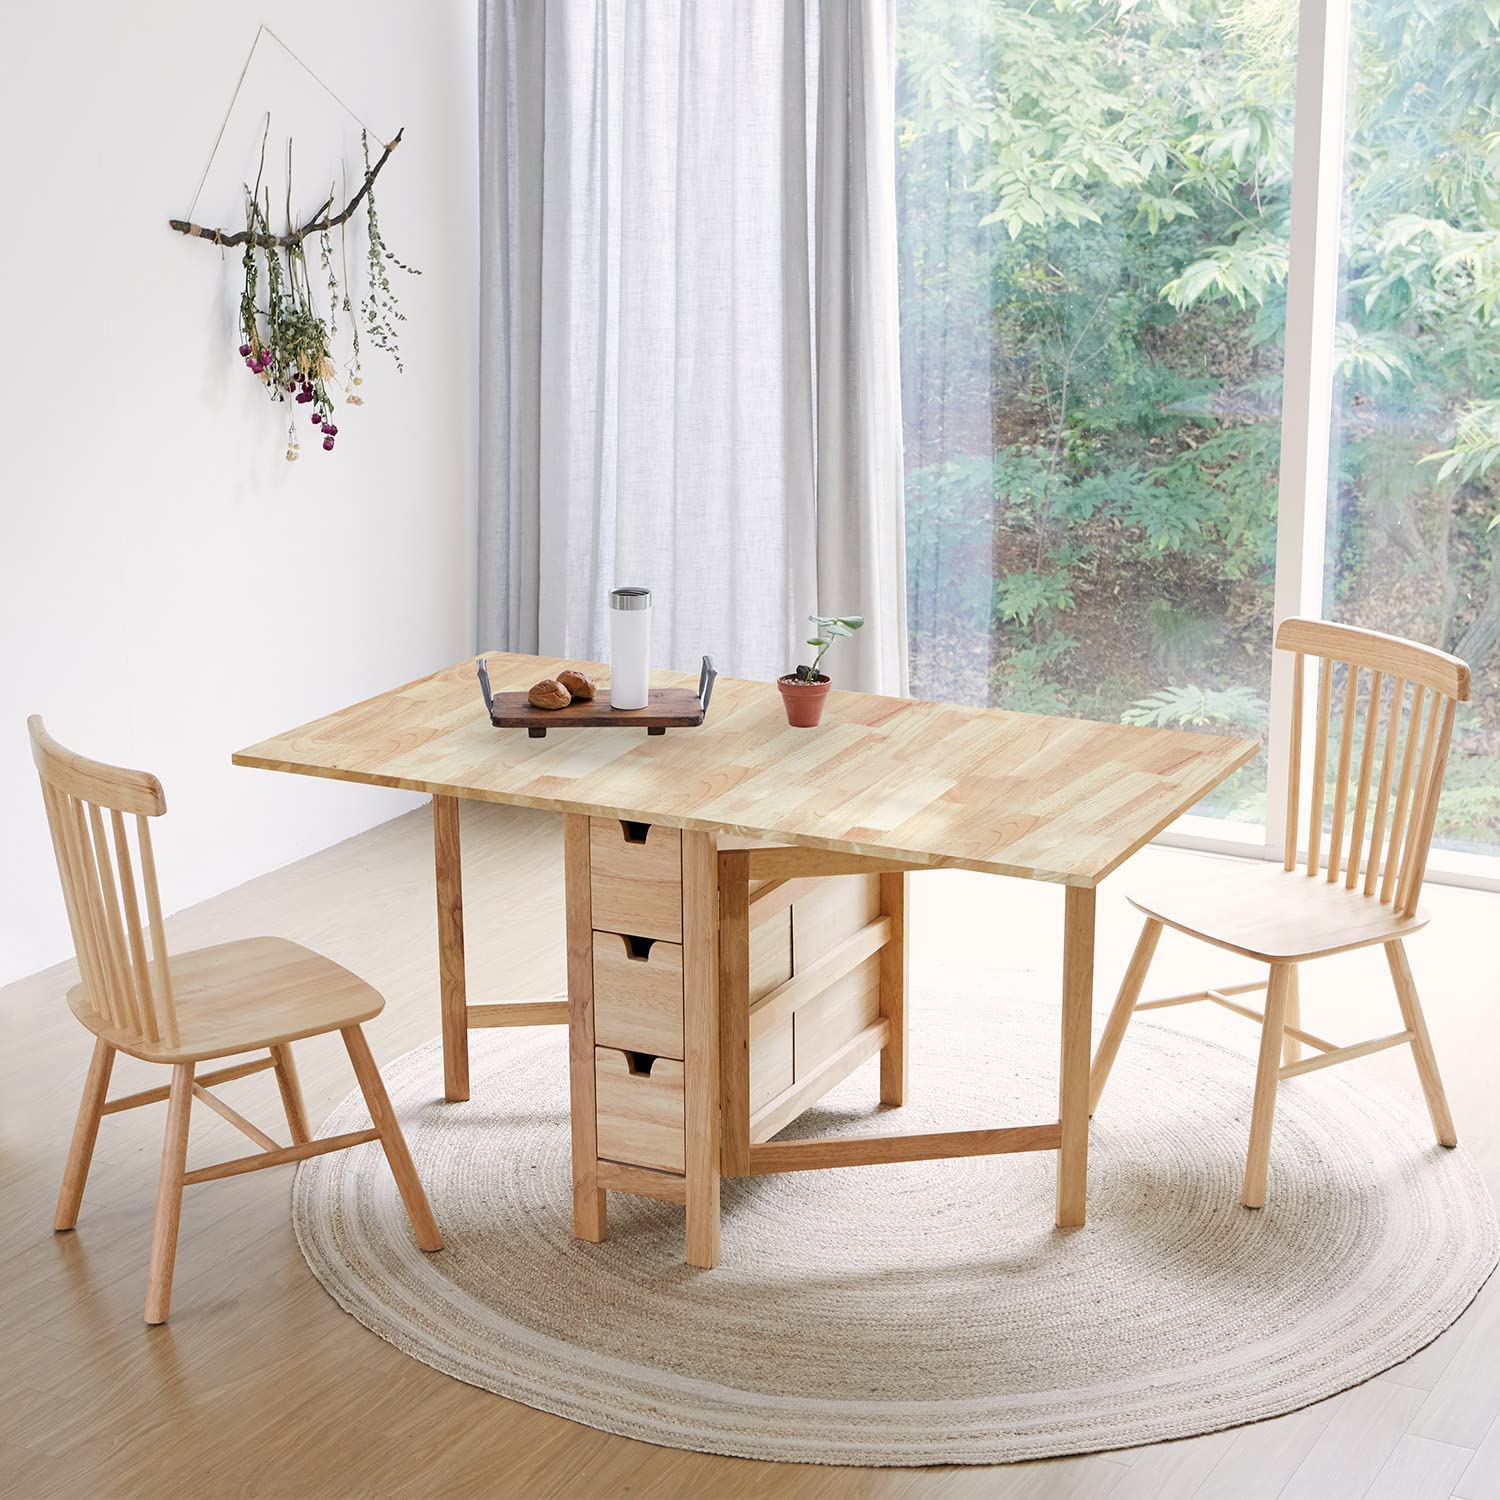 Wings Gate Leg Dining Table.